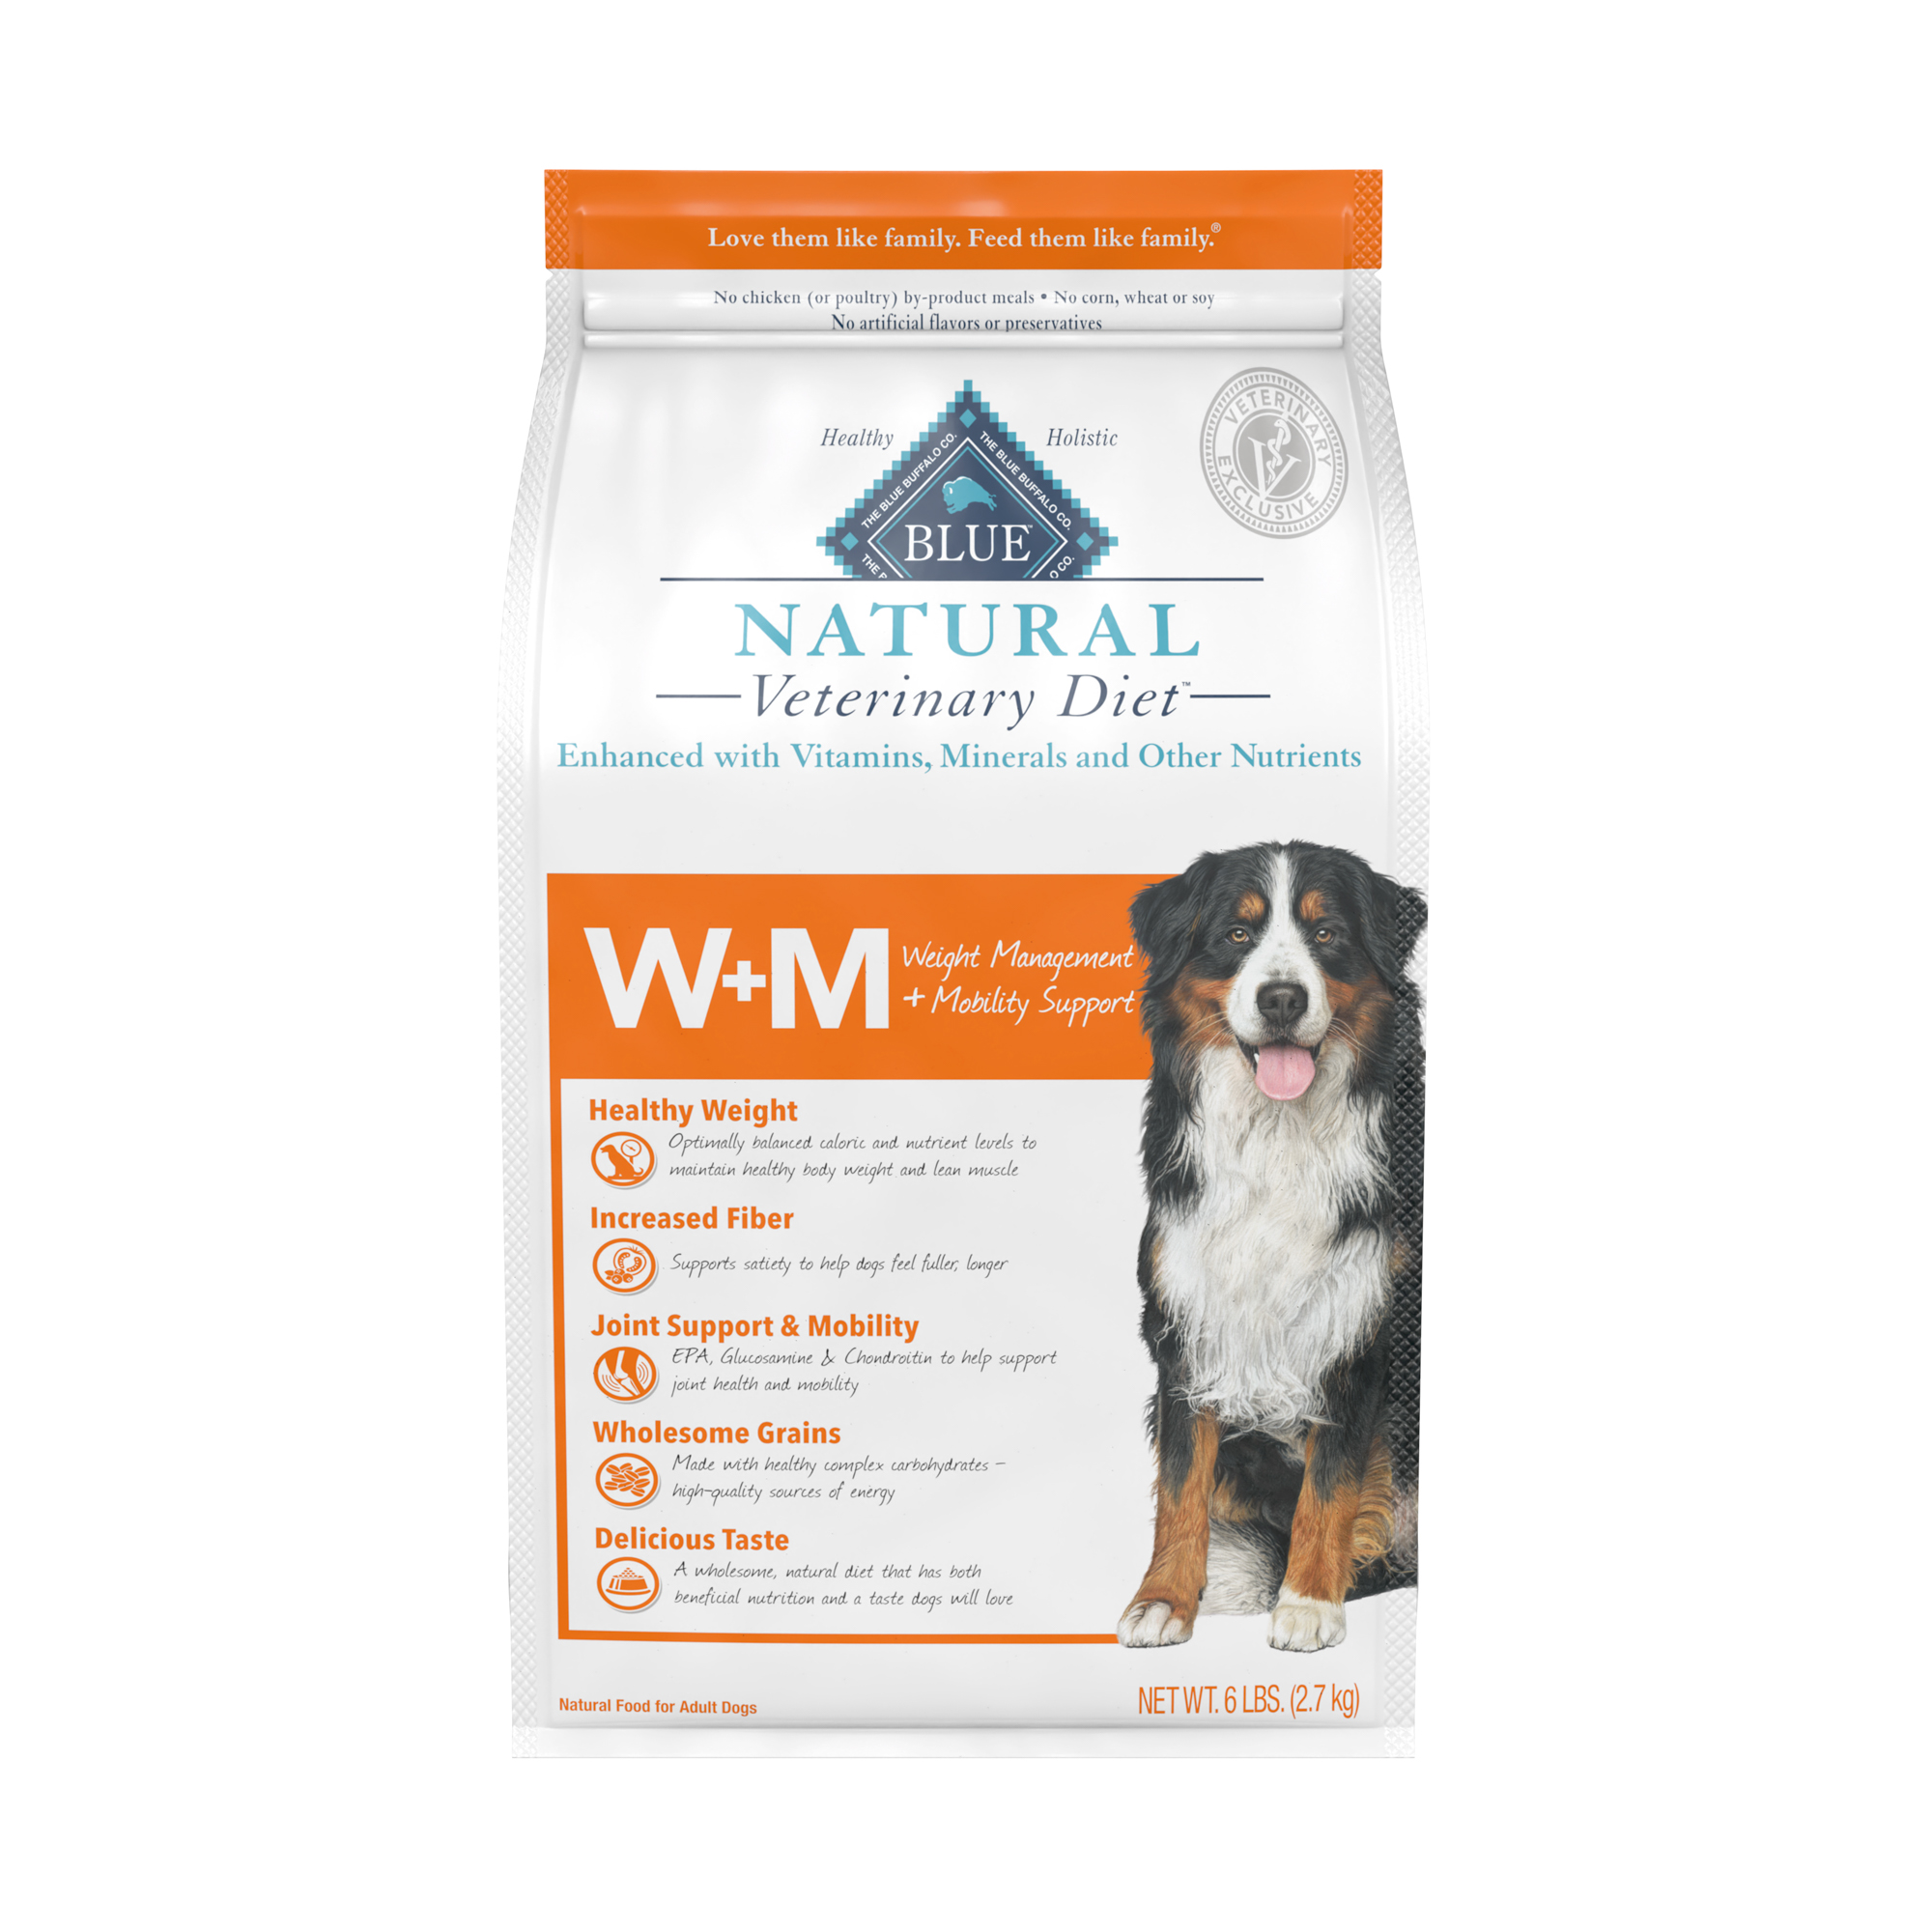 BLUE Natural Veterinary Diet W+M Weight Management + Mobility Support Dry Dog Food Usage